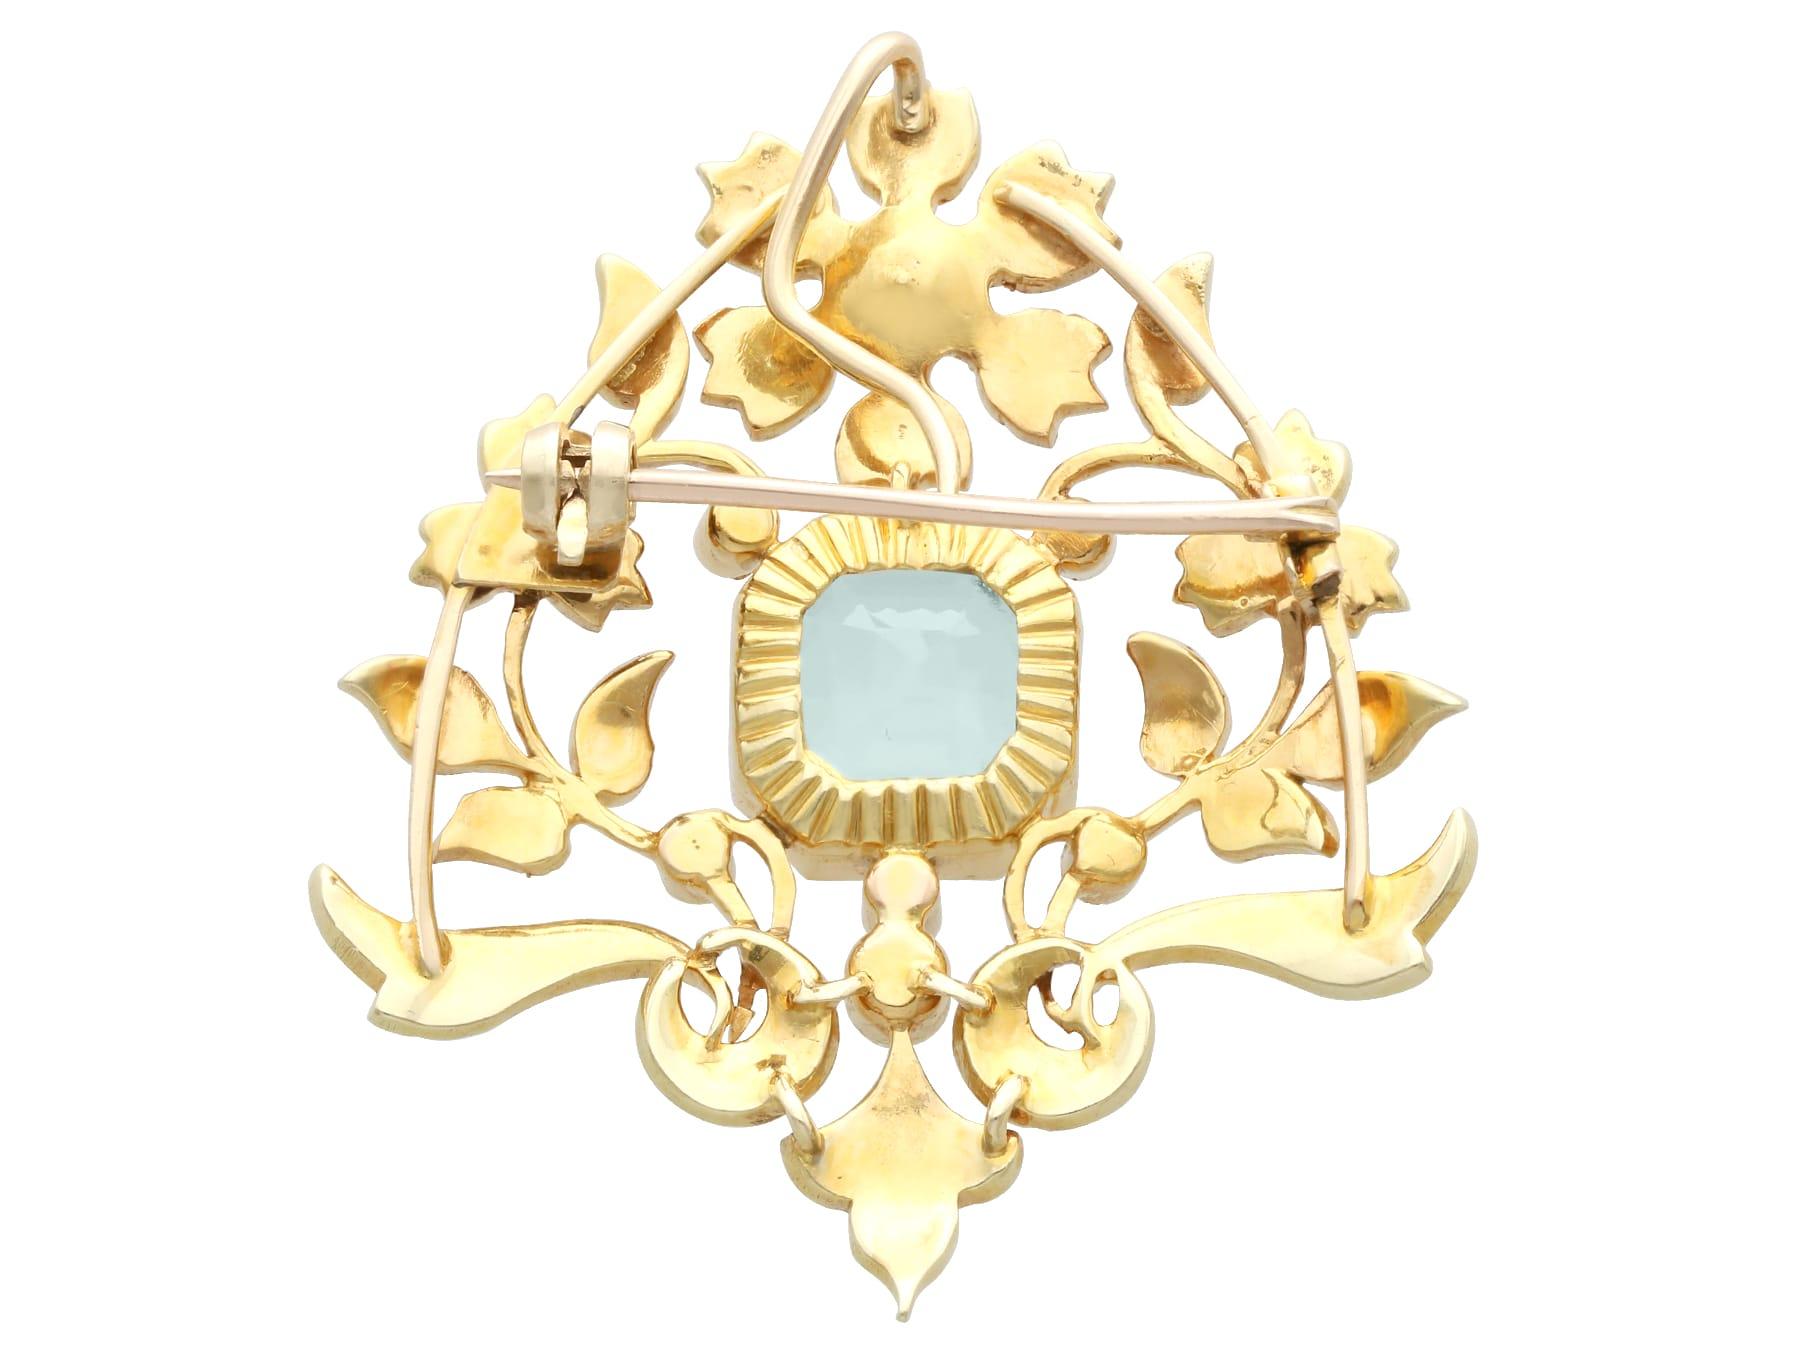 Antique 4.10Ct Aquamarine and Seed Pearl 15k Yellow Gold Pendant / Brooch  For Sale 4